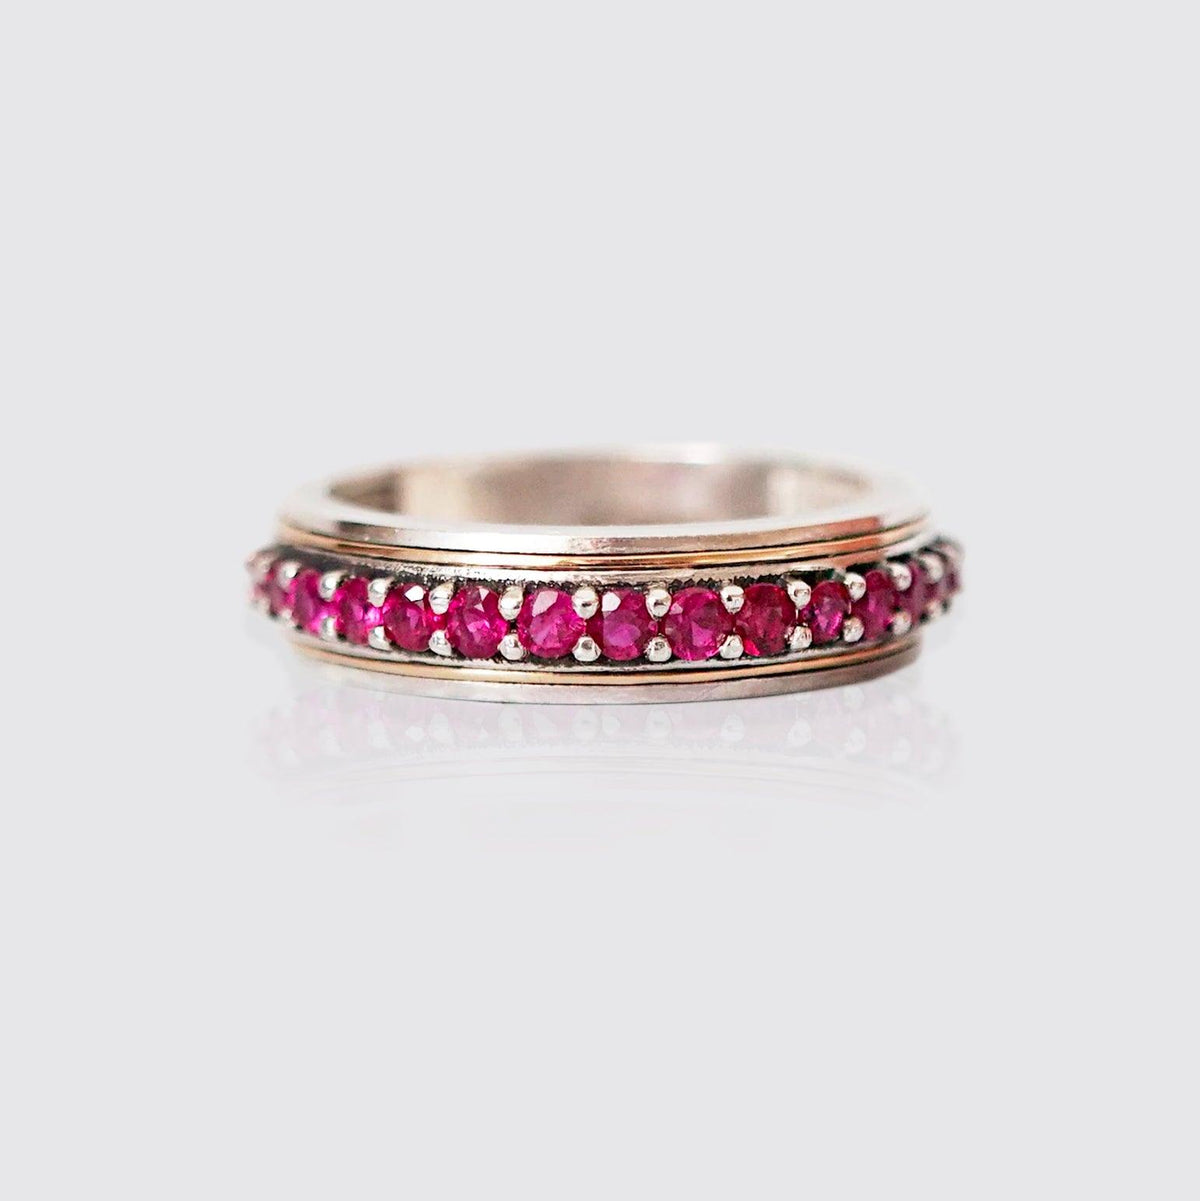 Silver/22K Gold Inlay Ruby Ring, 5mm - Tippy Taste Jewelry